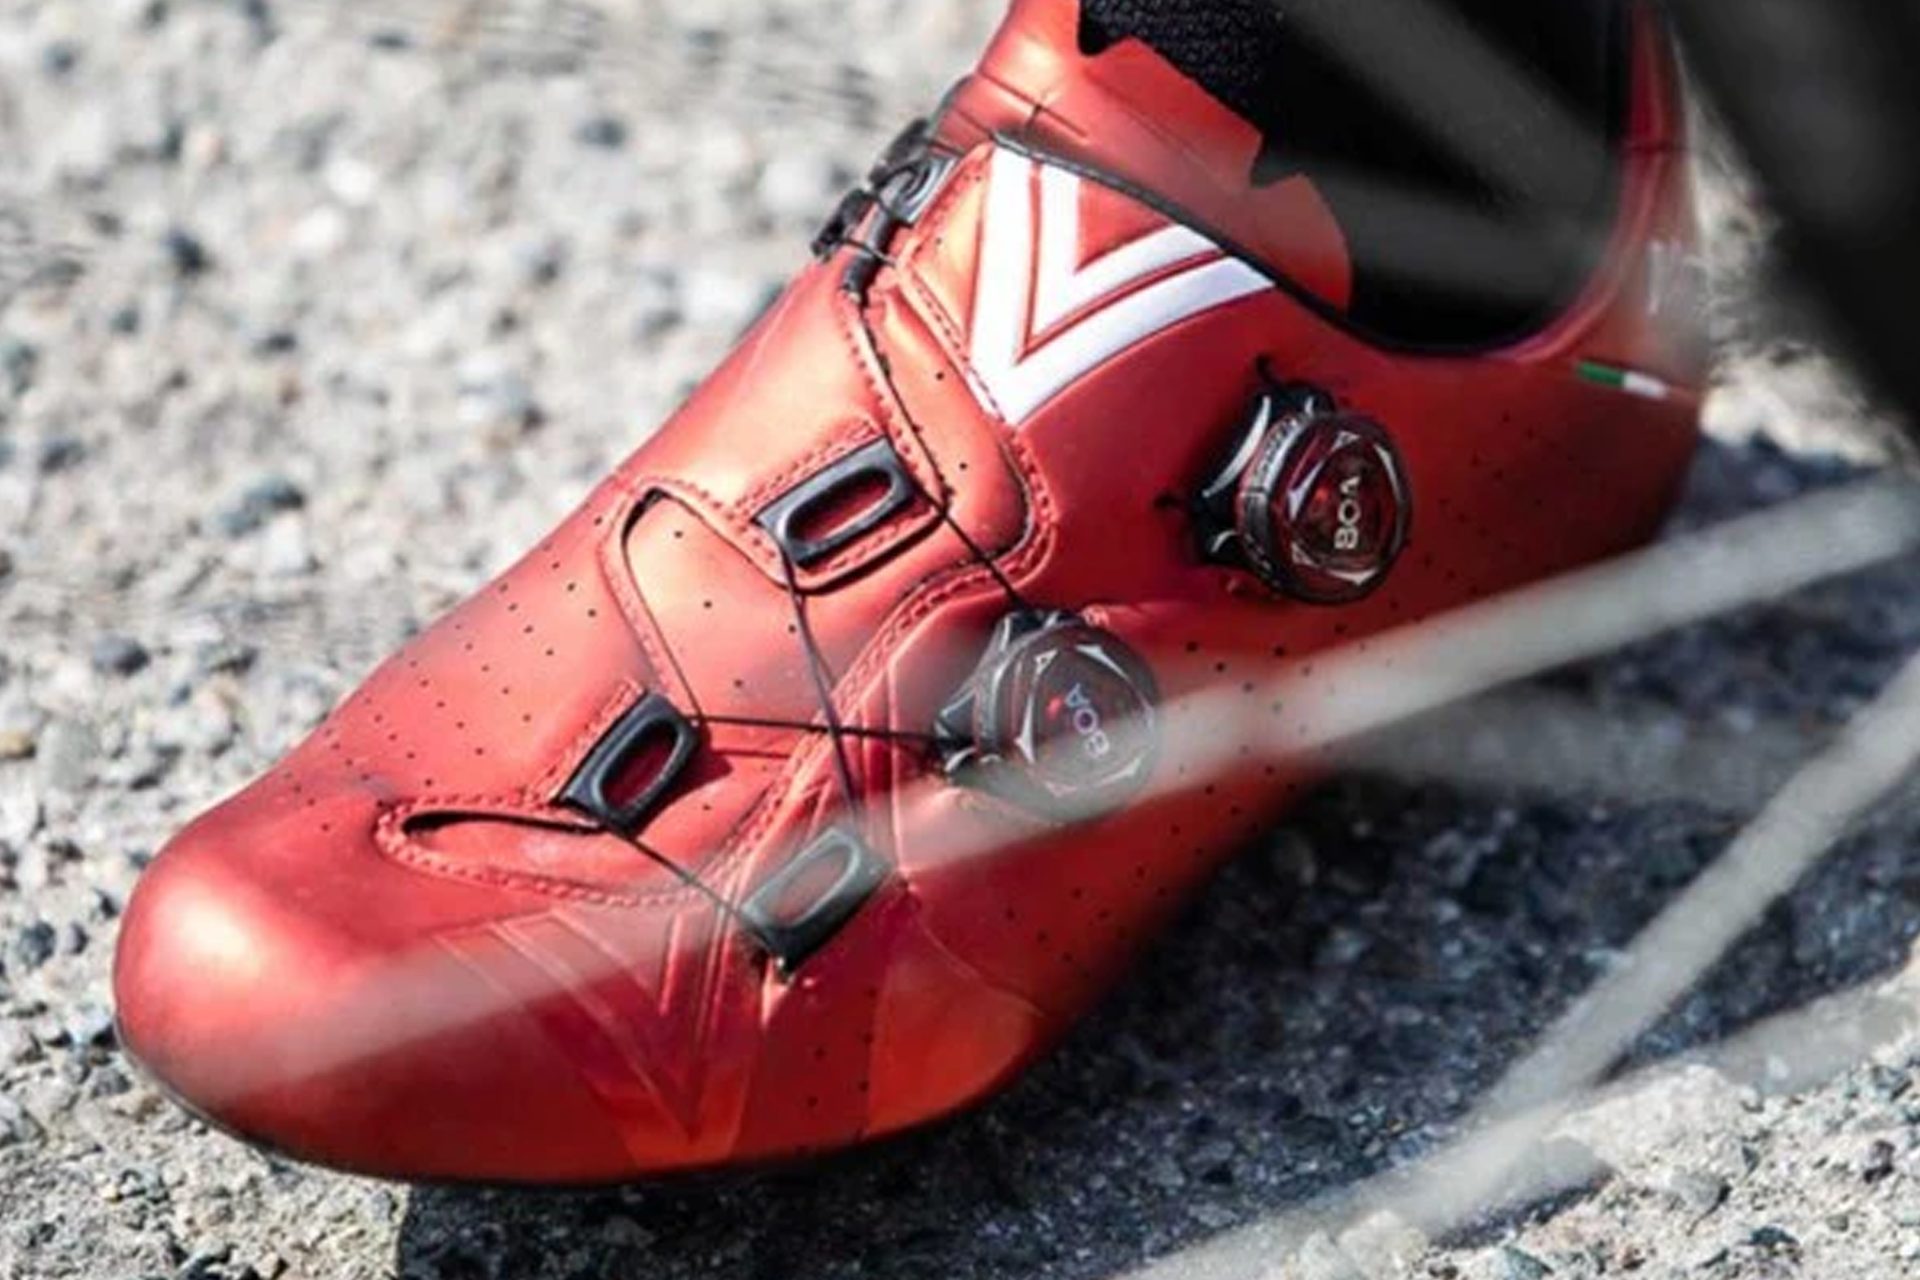 pros and cons of getting insoles for cycling shoes